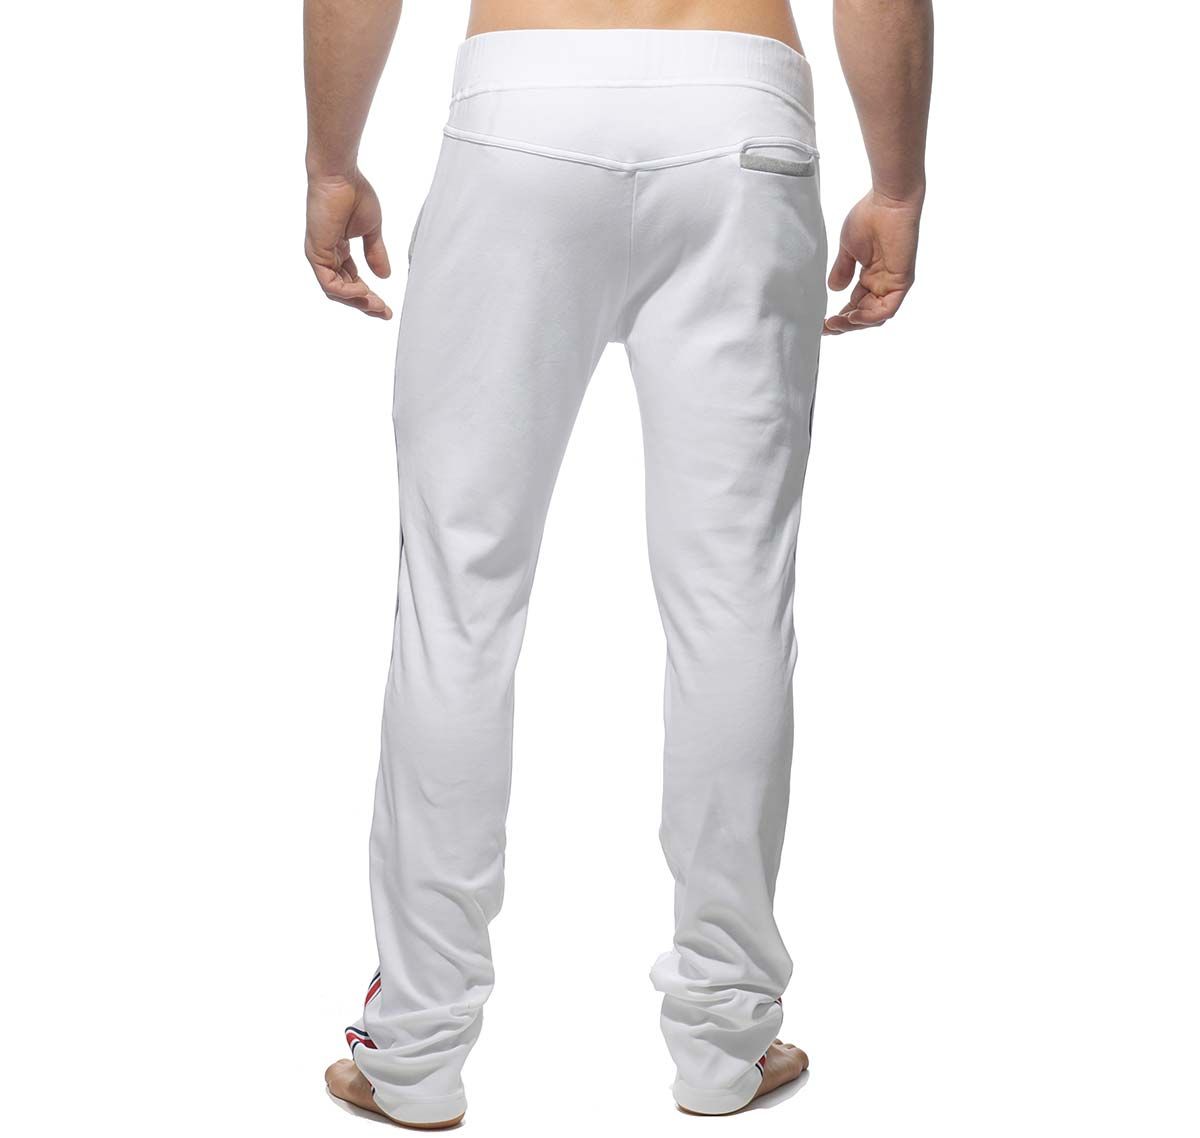 Addicted lange Sporthose LONG TIGHT PANT INTERCOTTON AD335, weiß